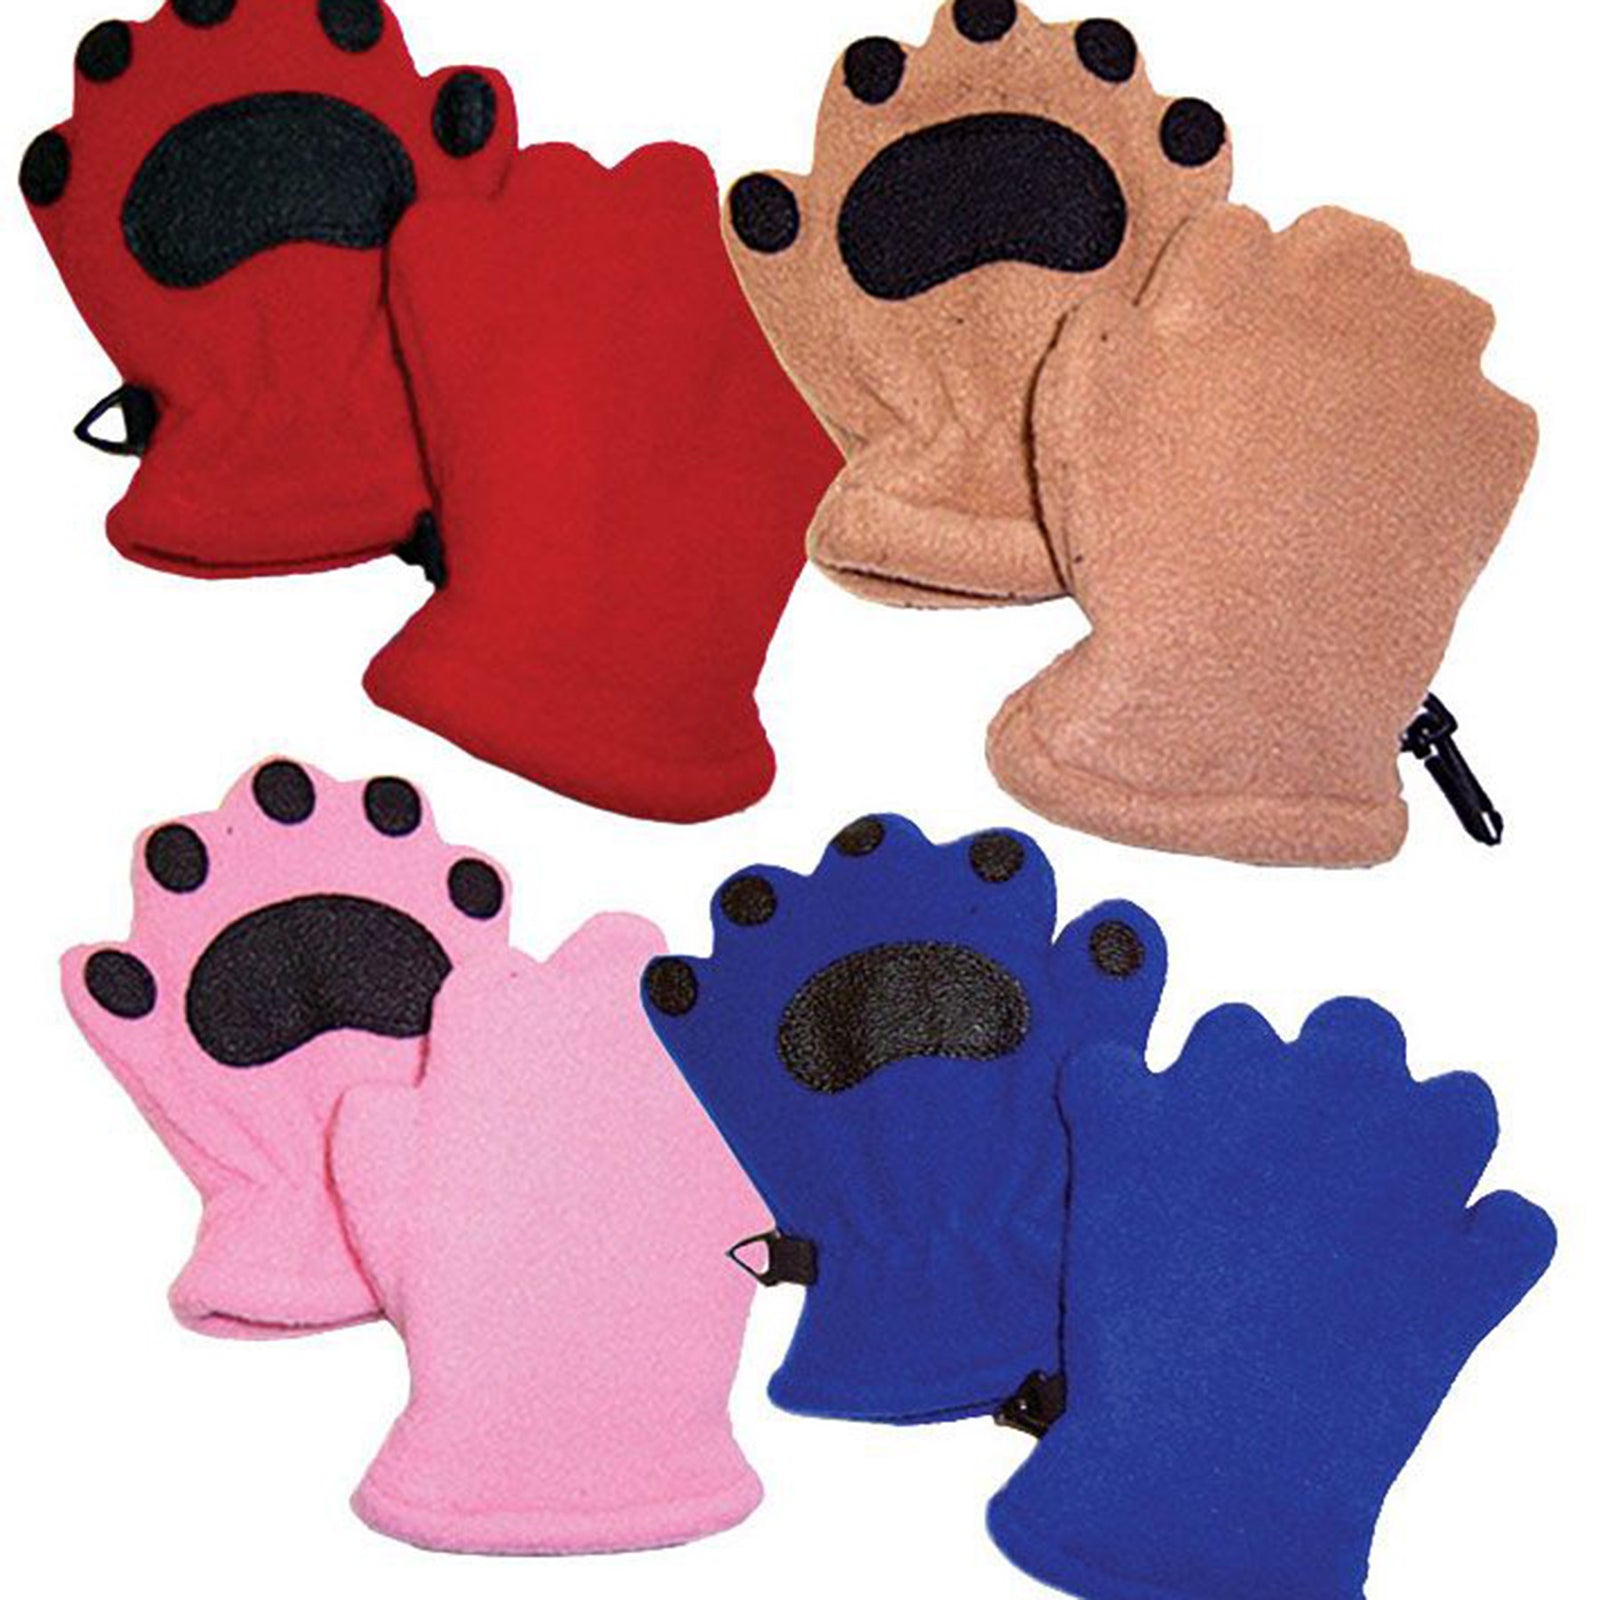 shown are the four colors and styles of the bearhands mittens - red, camel, blue, and pink